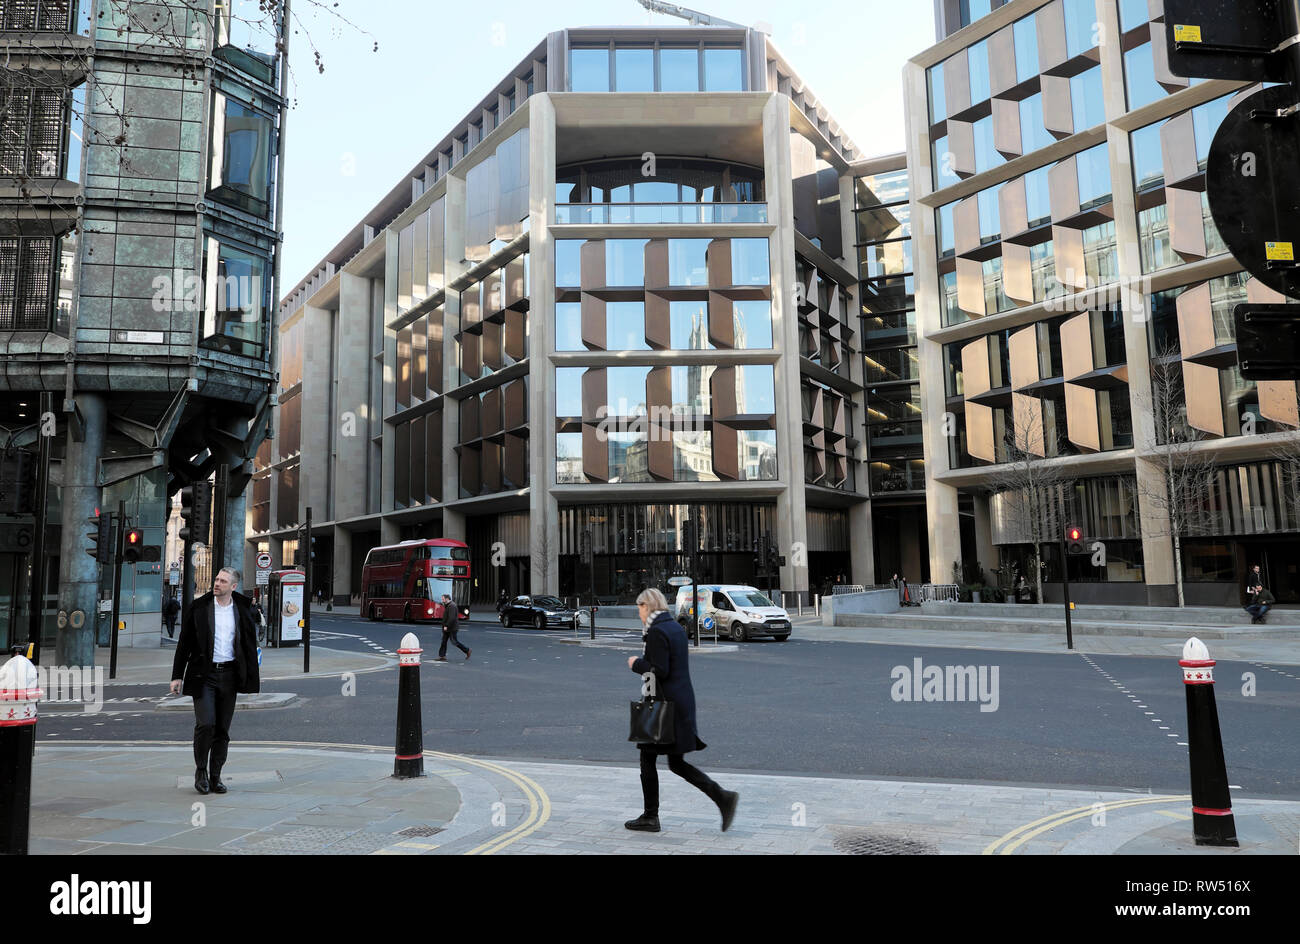 Street view of woman walking near the Bloomberg Building offices on Queen Victoria Street in the City of London England UK    KATHY DEWITT Stock Photo